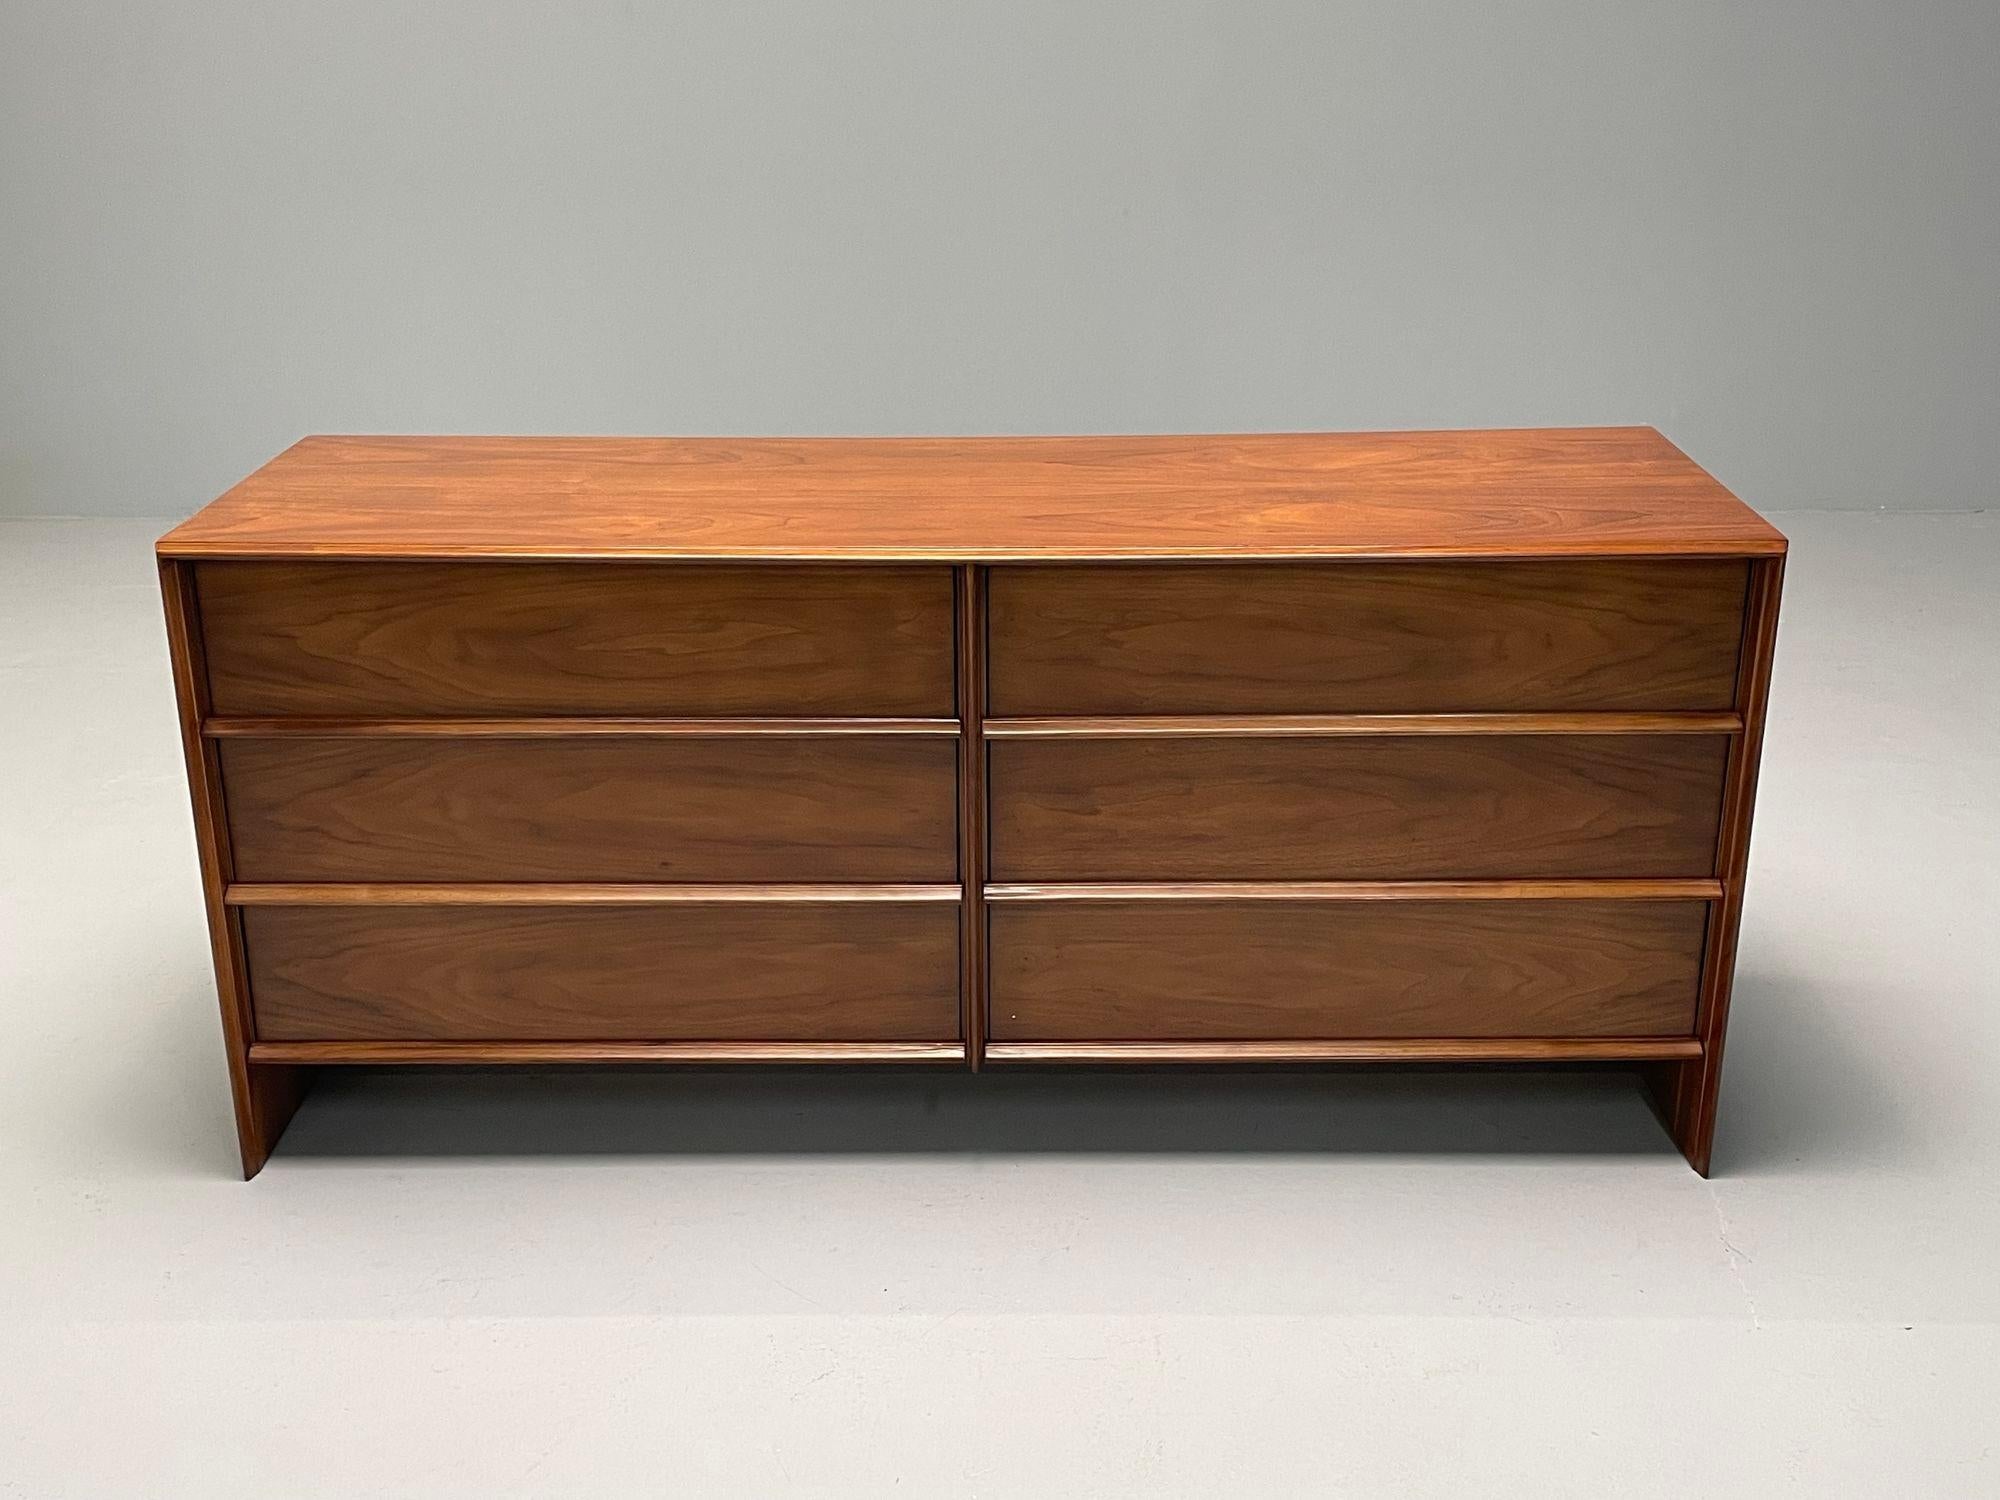 T.H. Robsjohn-Gibbings, Widdicomb, Mid-Century Modern Dresser, Walnut, USA 1950s

Chic mid-century double dresser in solid walnut bearing hidden drawer pulls. The front of the 6 drawer case is given a floating appearance with a recessed pedestal